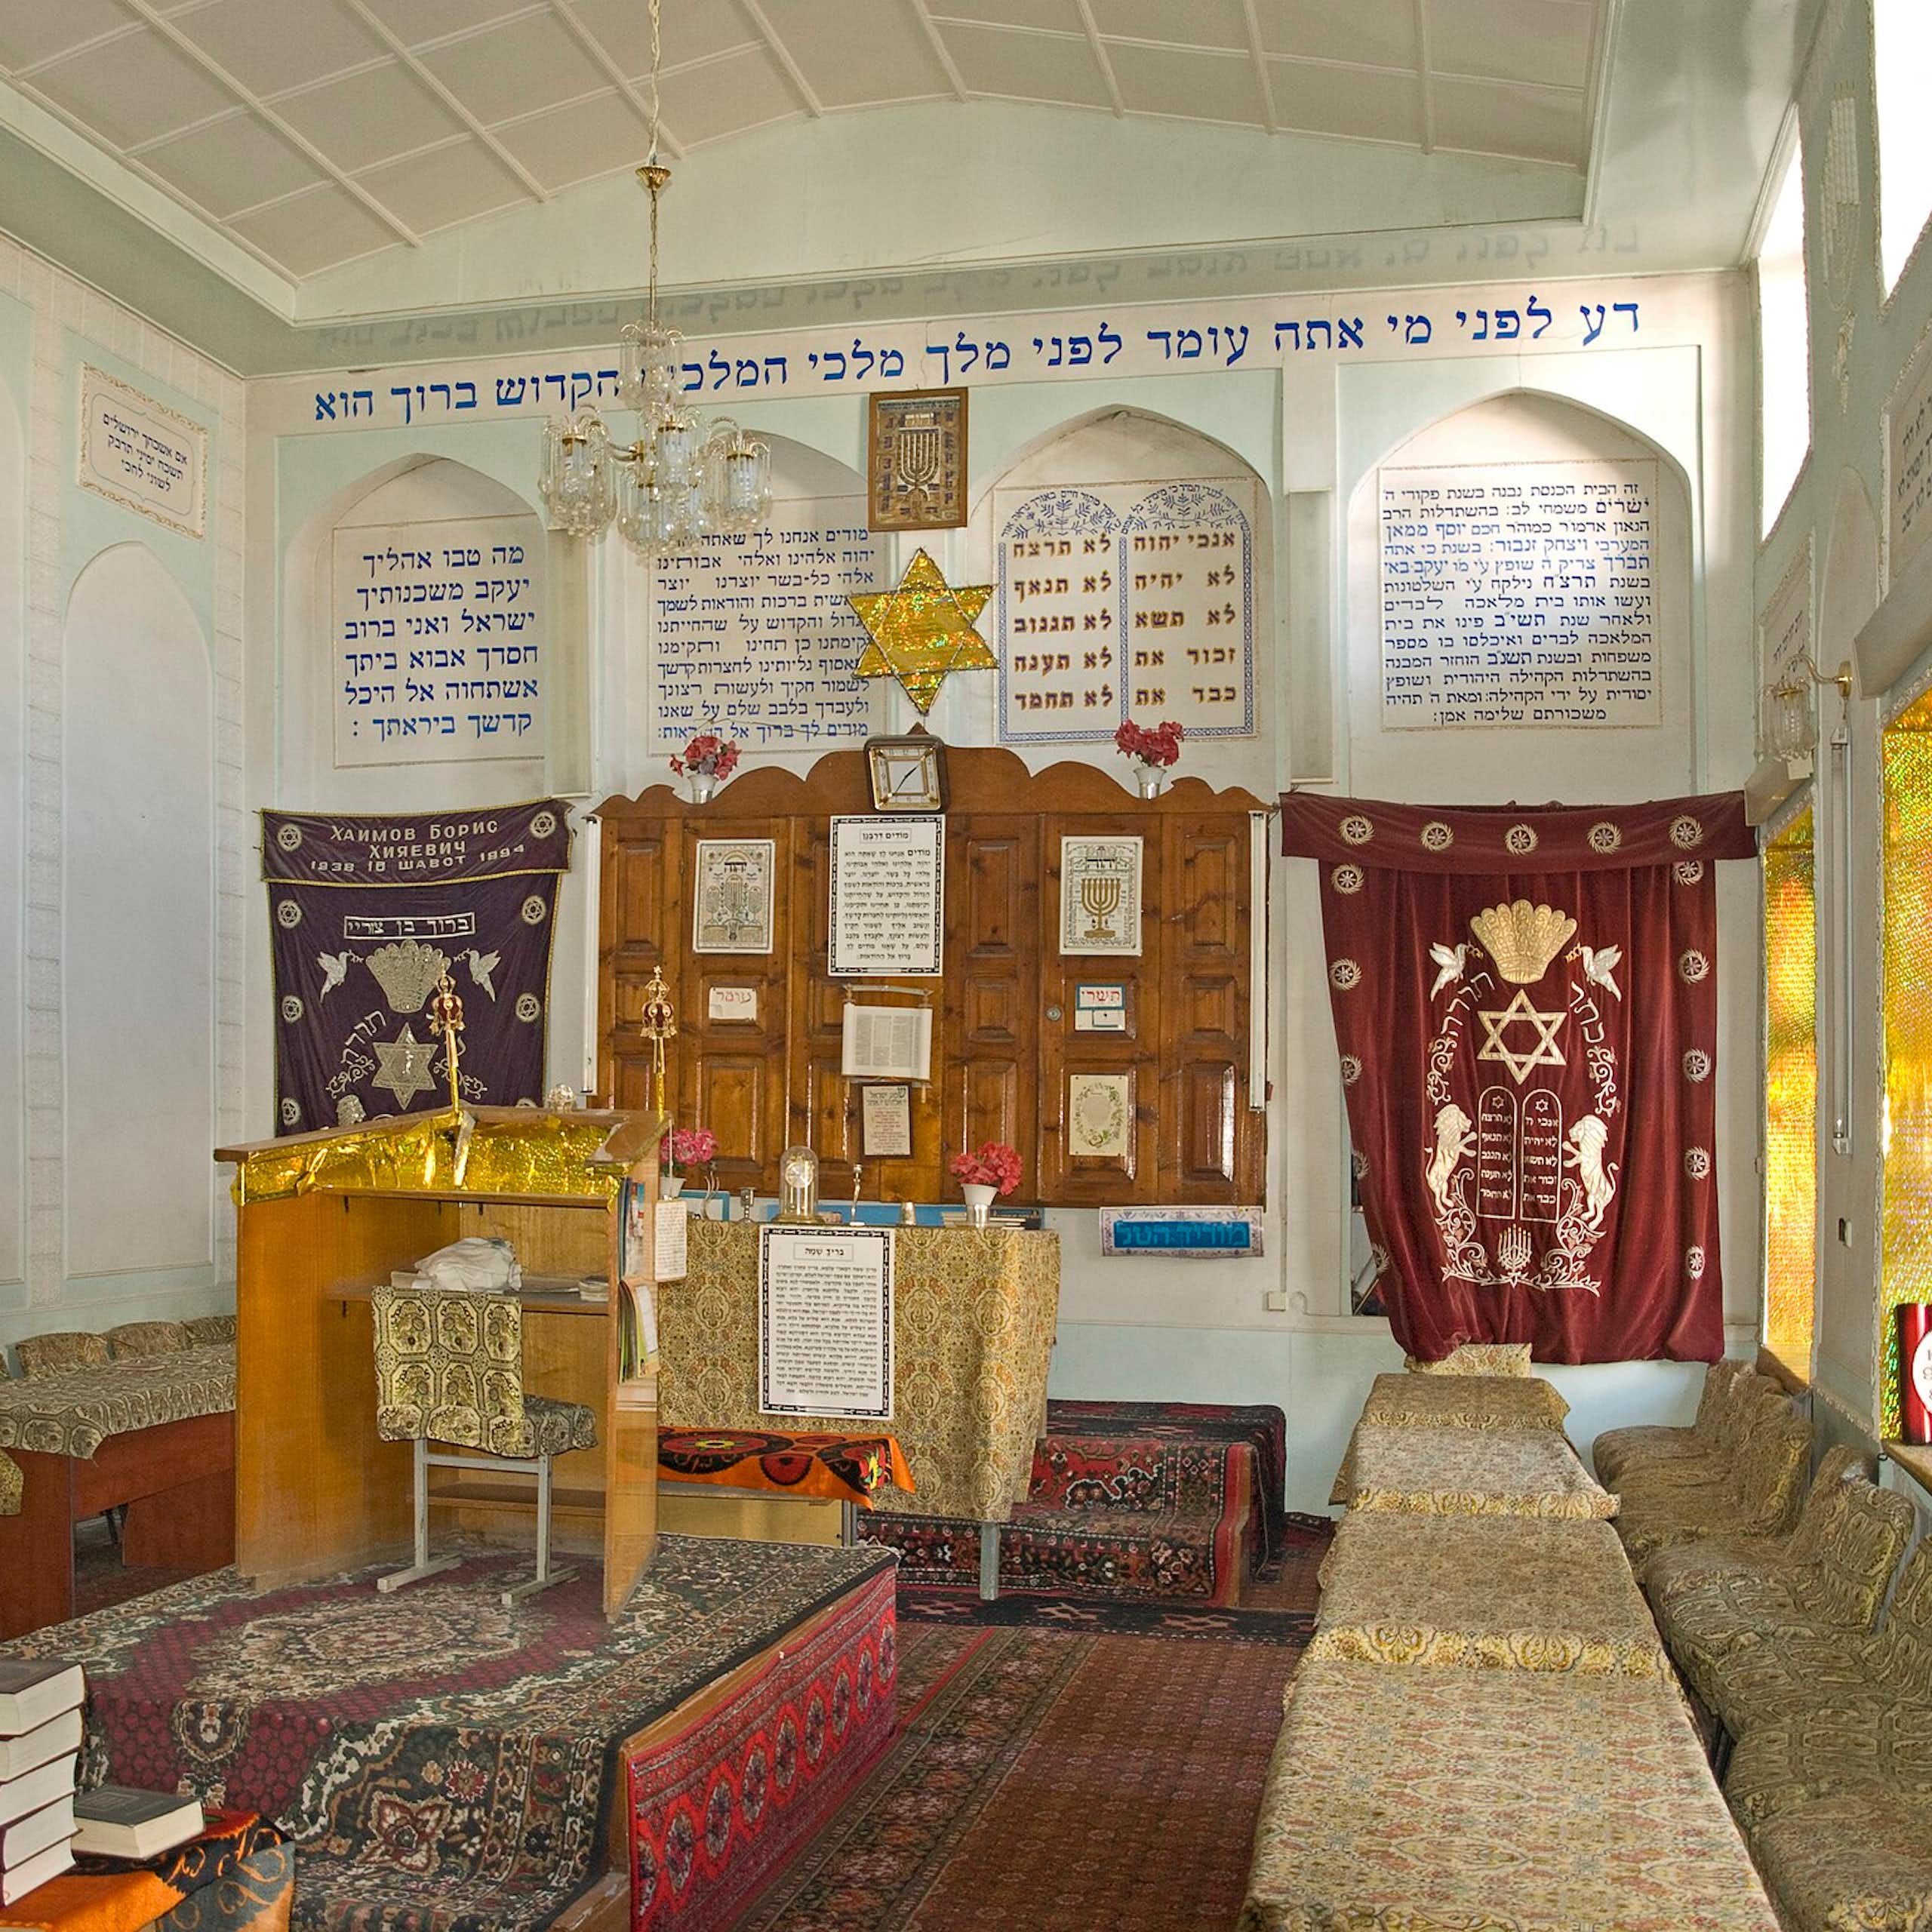 A carpeted interior of a synagogue.